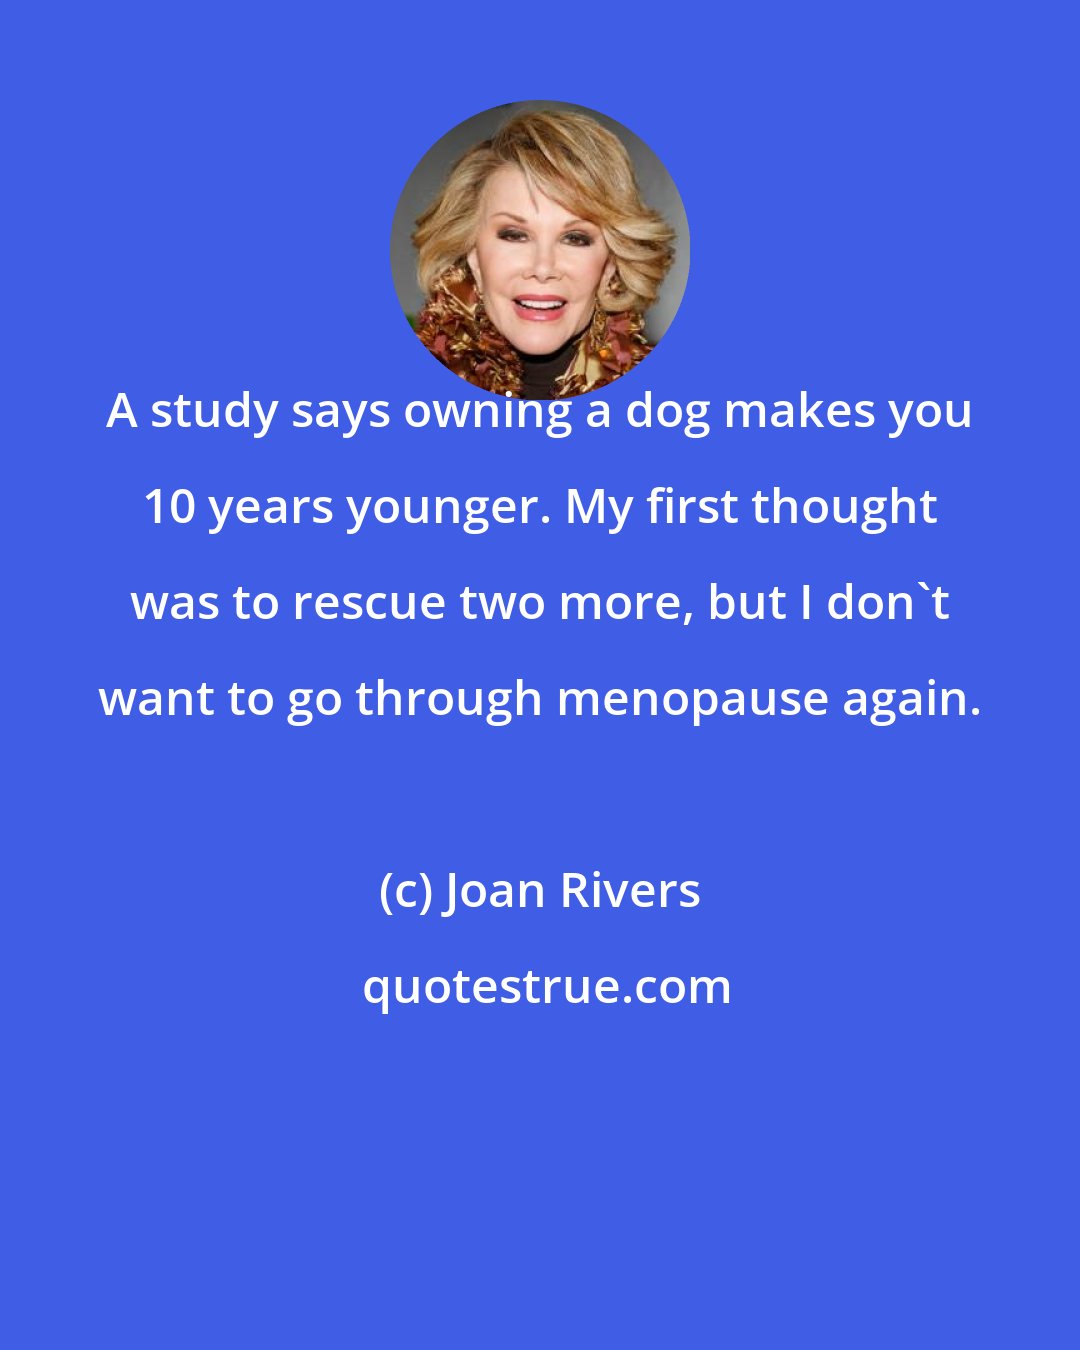 Joan Rivers: A study says owning a dog makes you 10 years younger. My first thought was to rescue two more, but I don't want to go through menopause again.